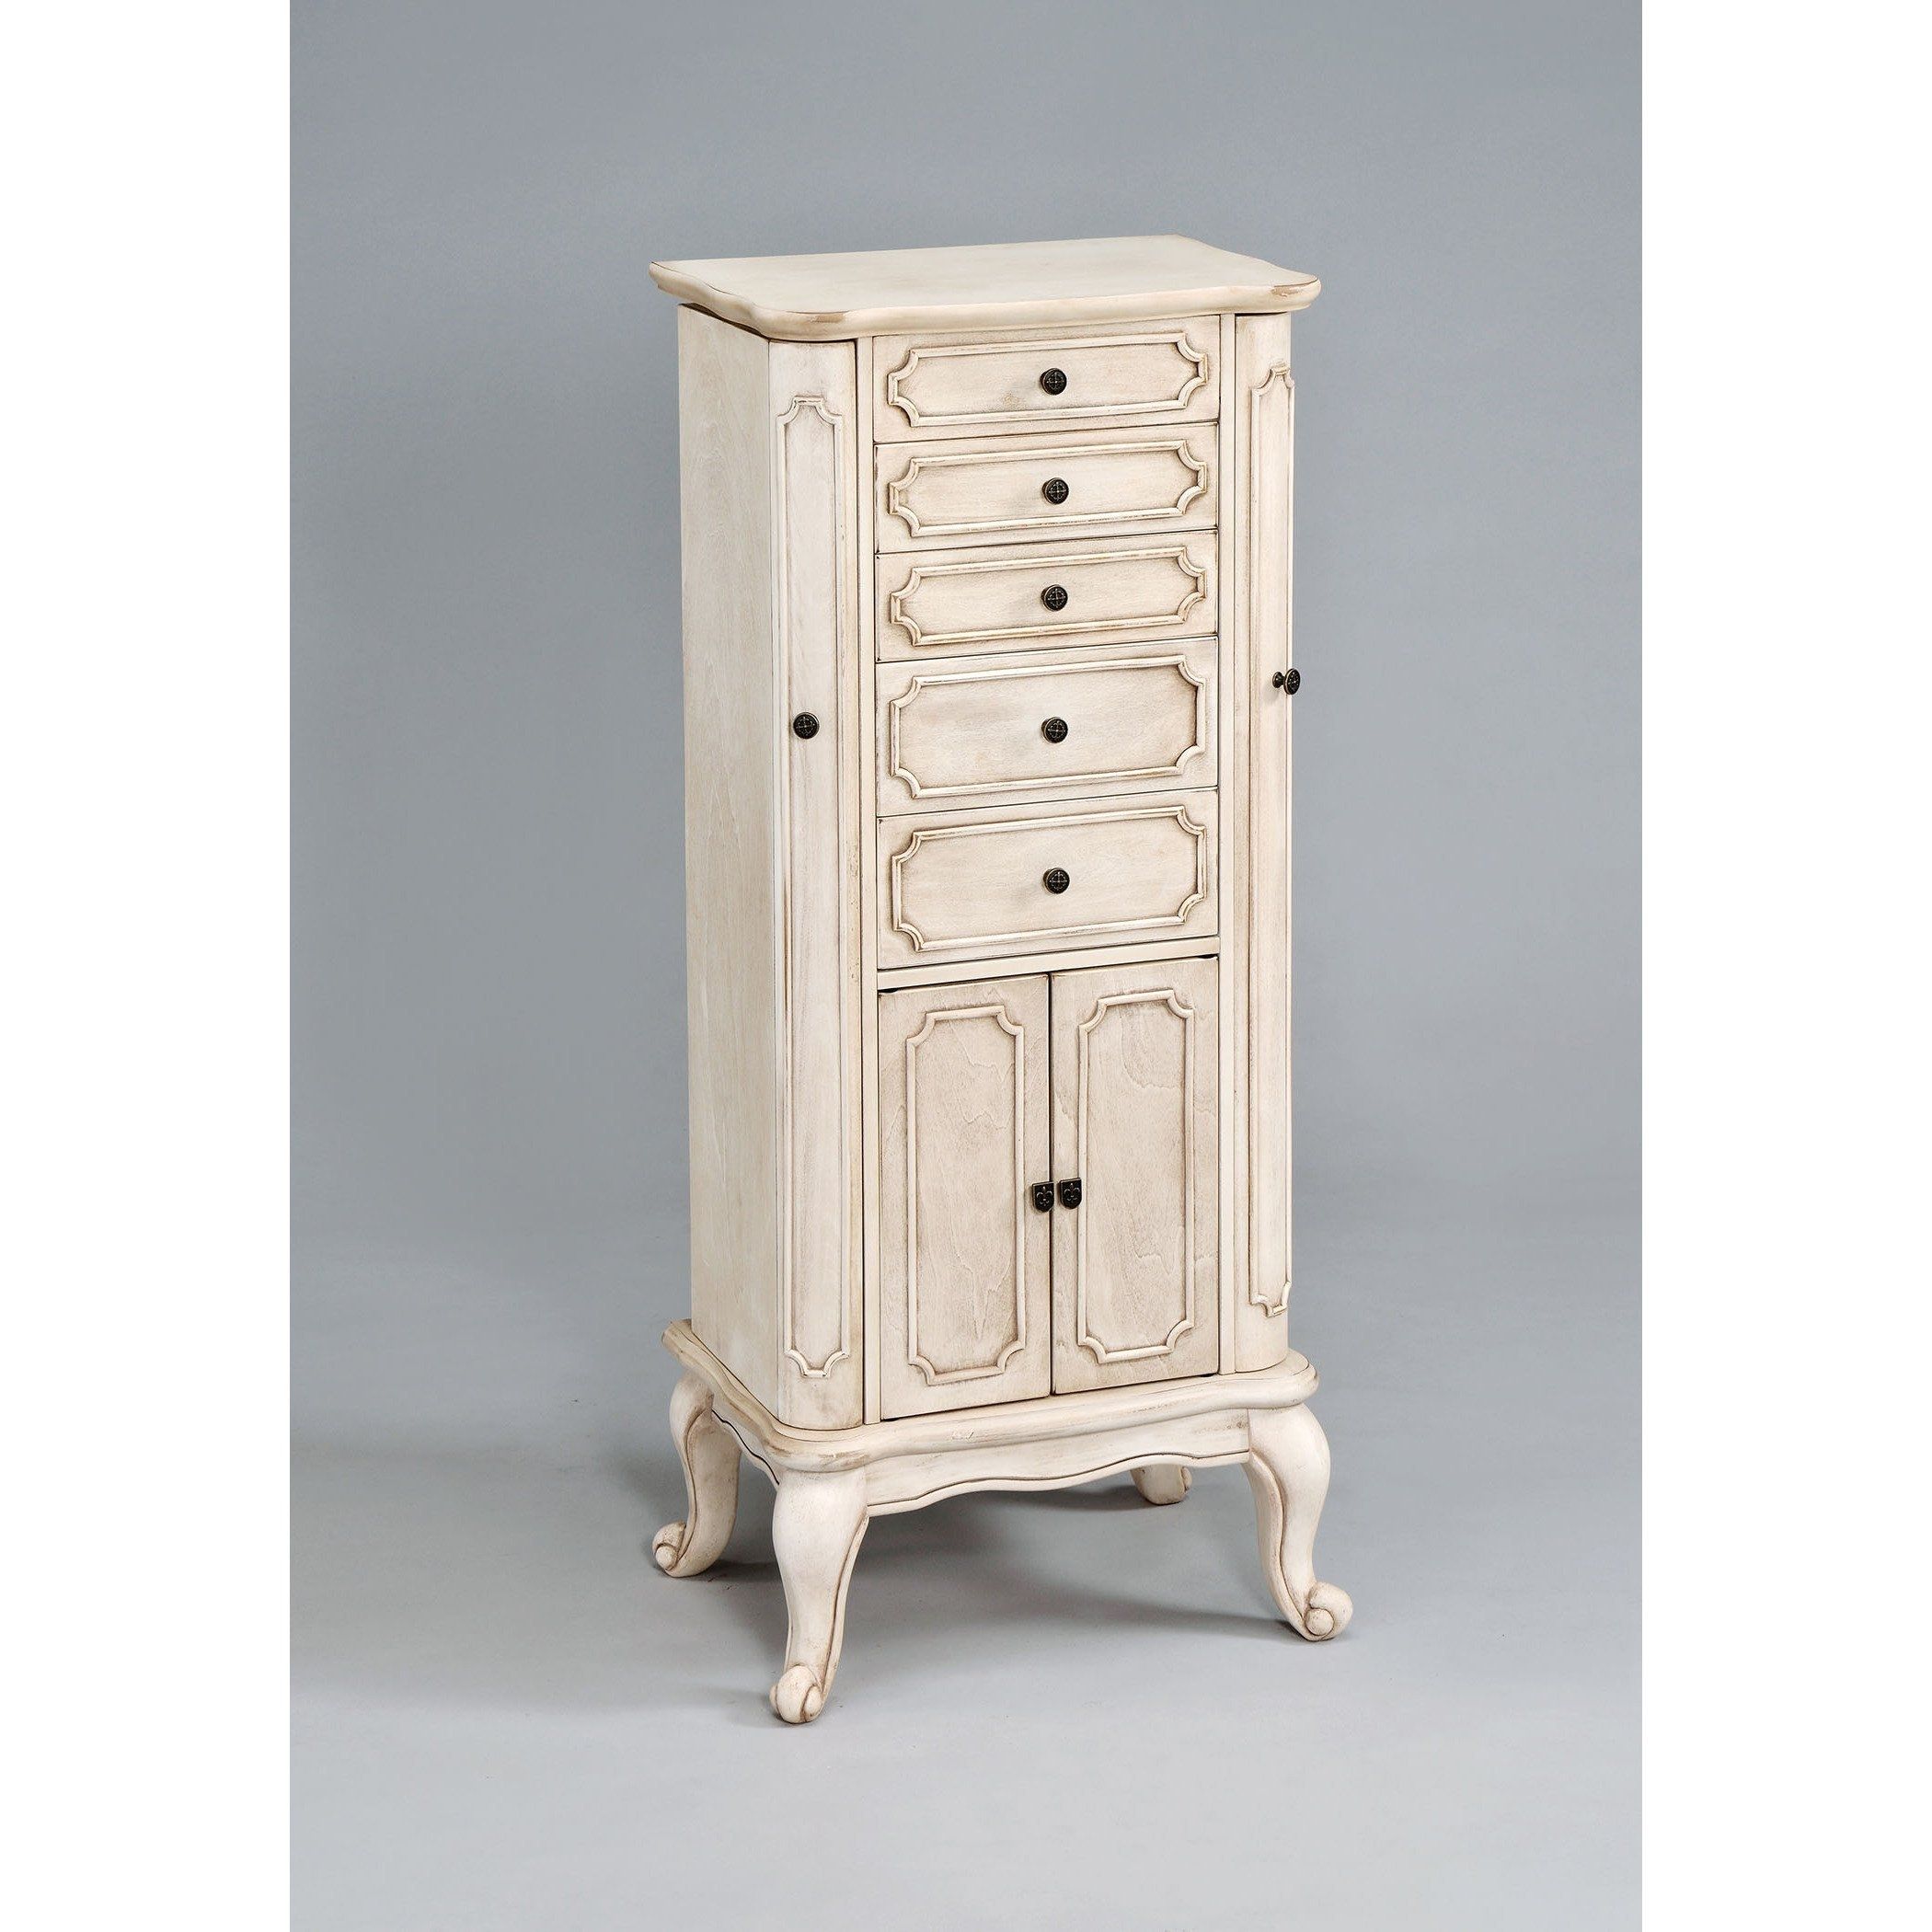 Shop Lief Antique White Wood Jewelry Armoire – Free Shipping Today Inside Current Leven Wine Sideboards (View 14 of 20)